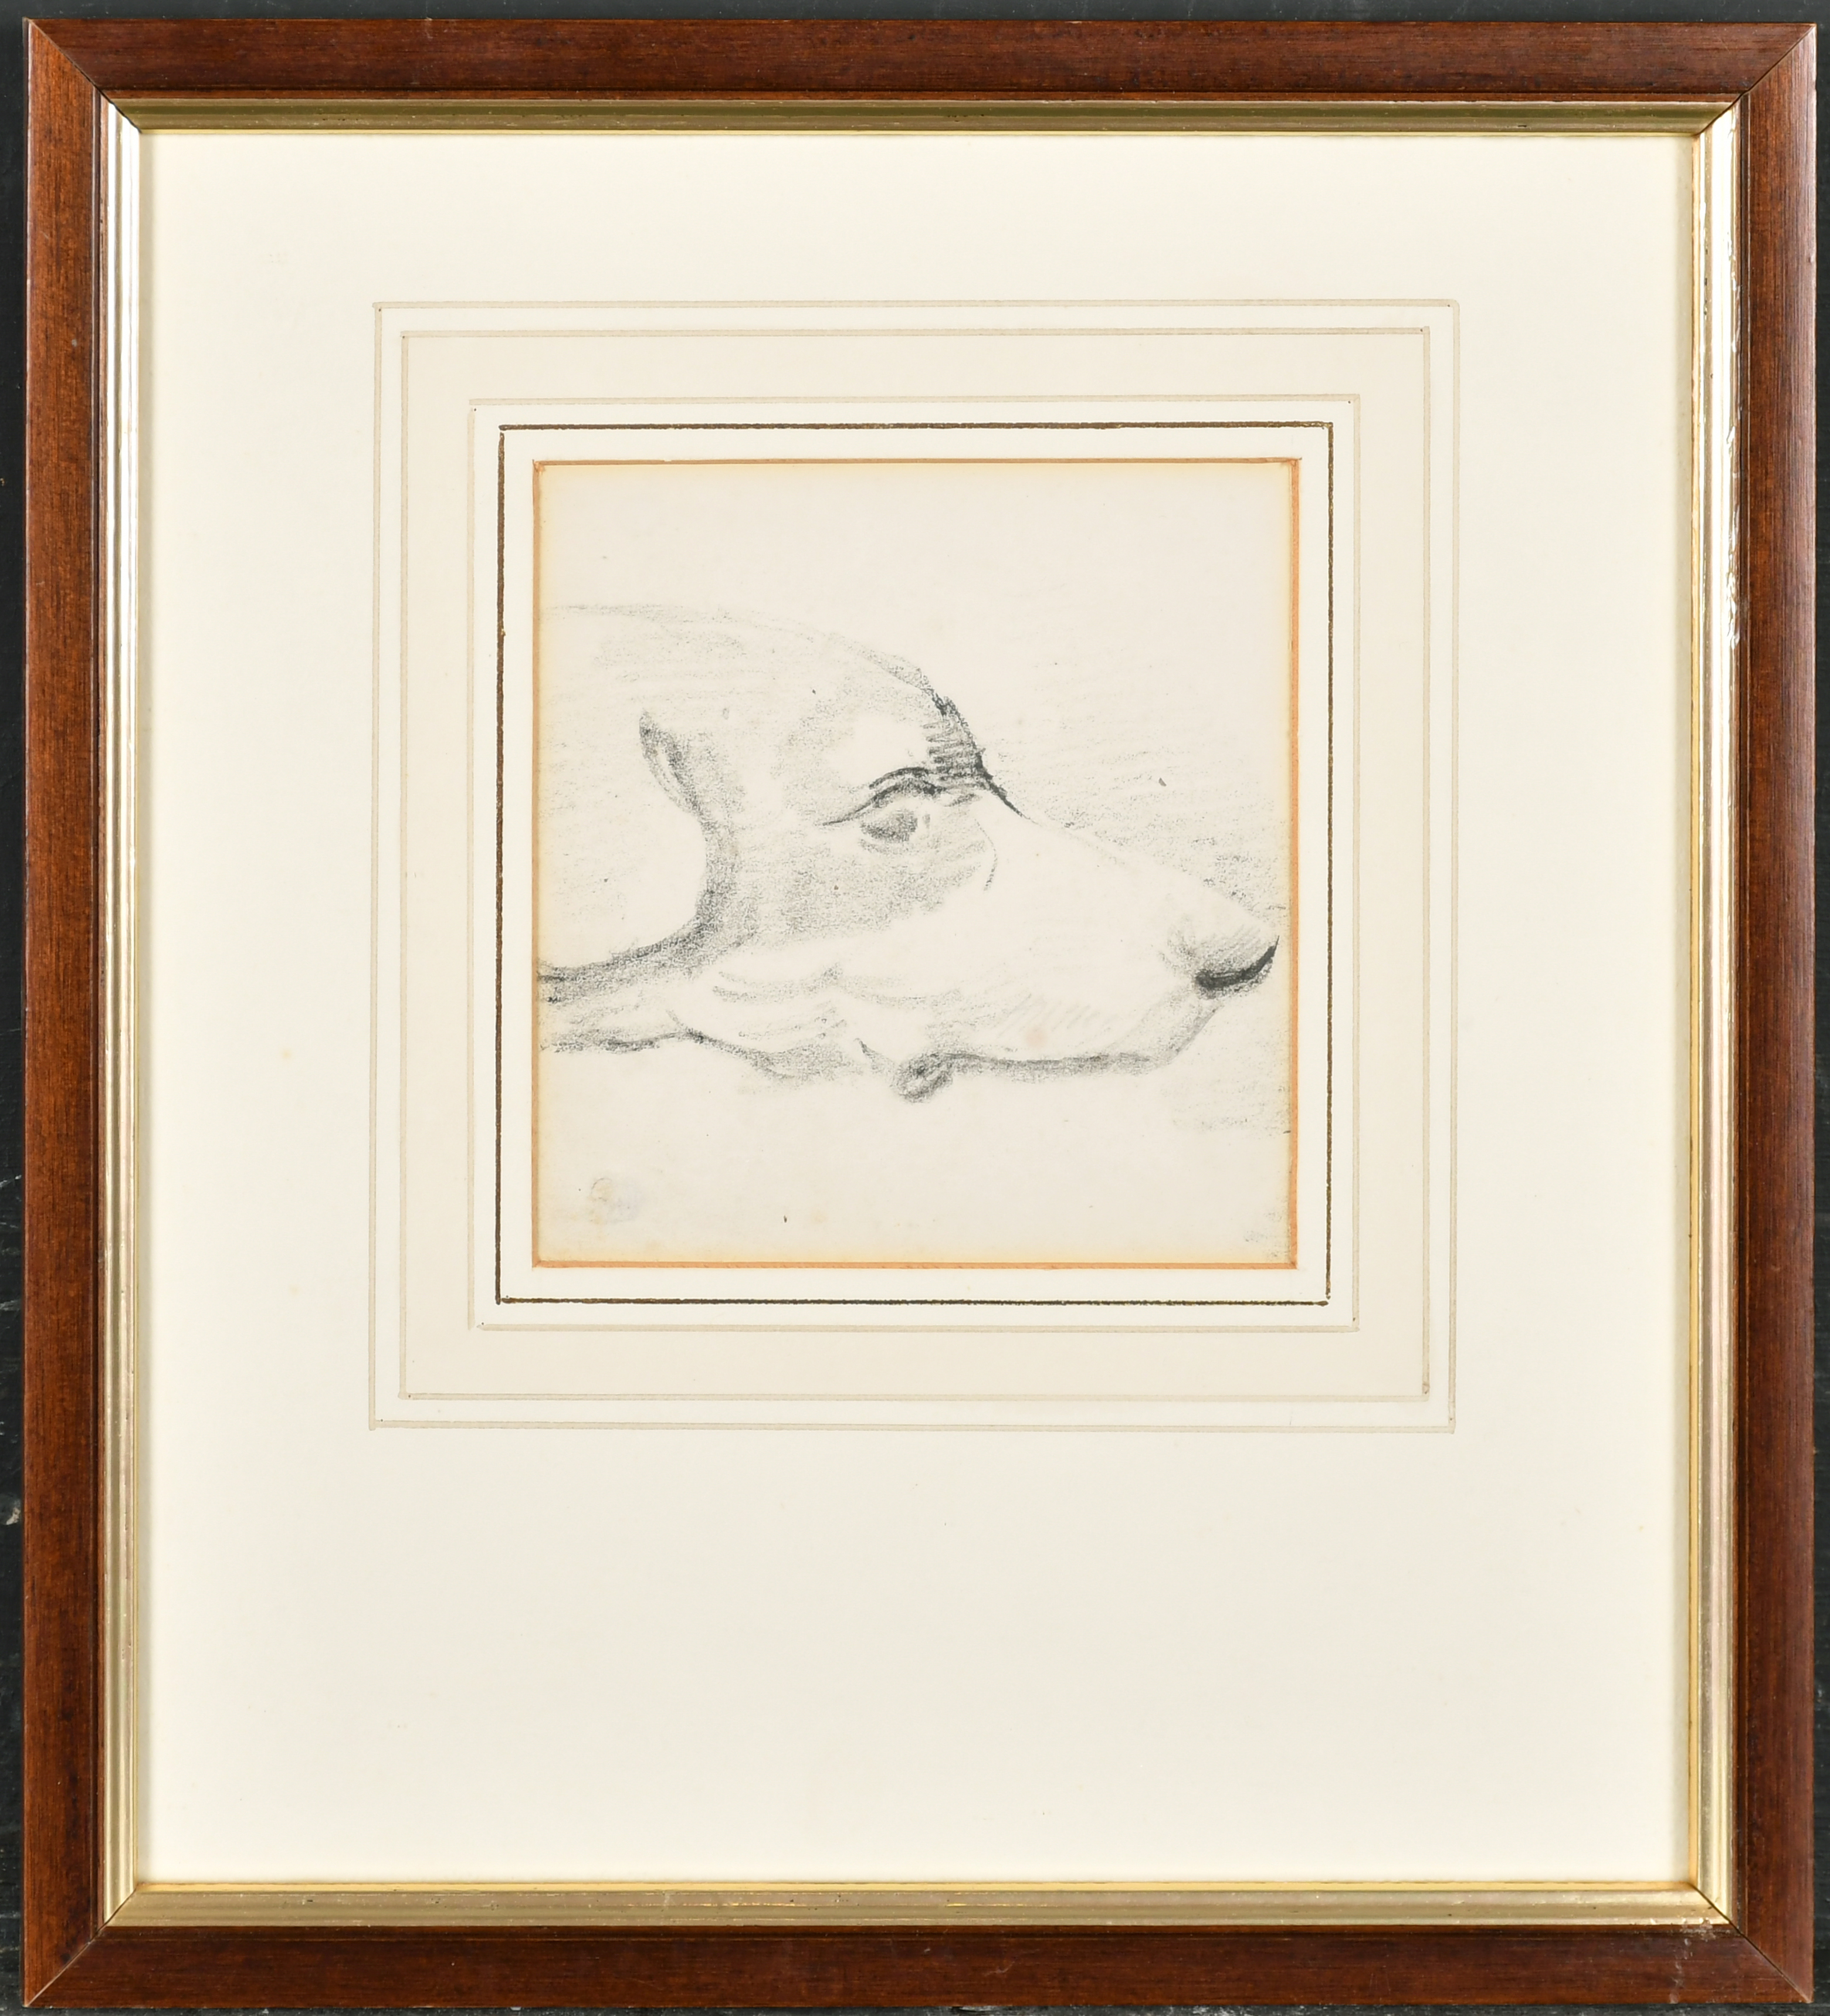 Attributed to Henry Alken (1774-1850) British. 'Head of a Hound', Pencil, Inscribed on a label - Image 2 of 10